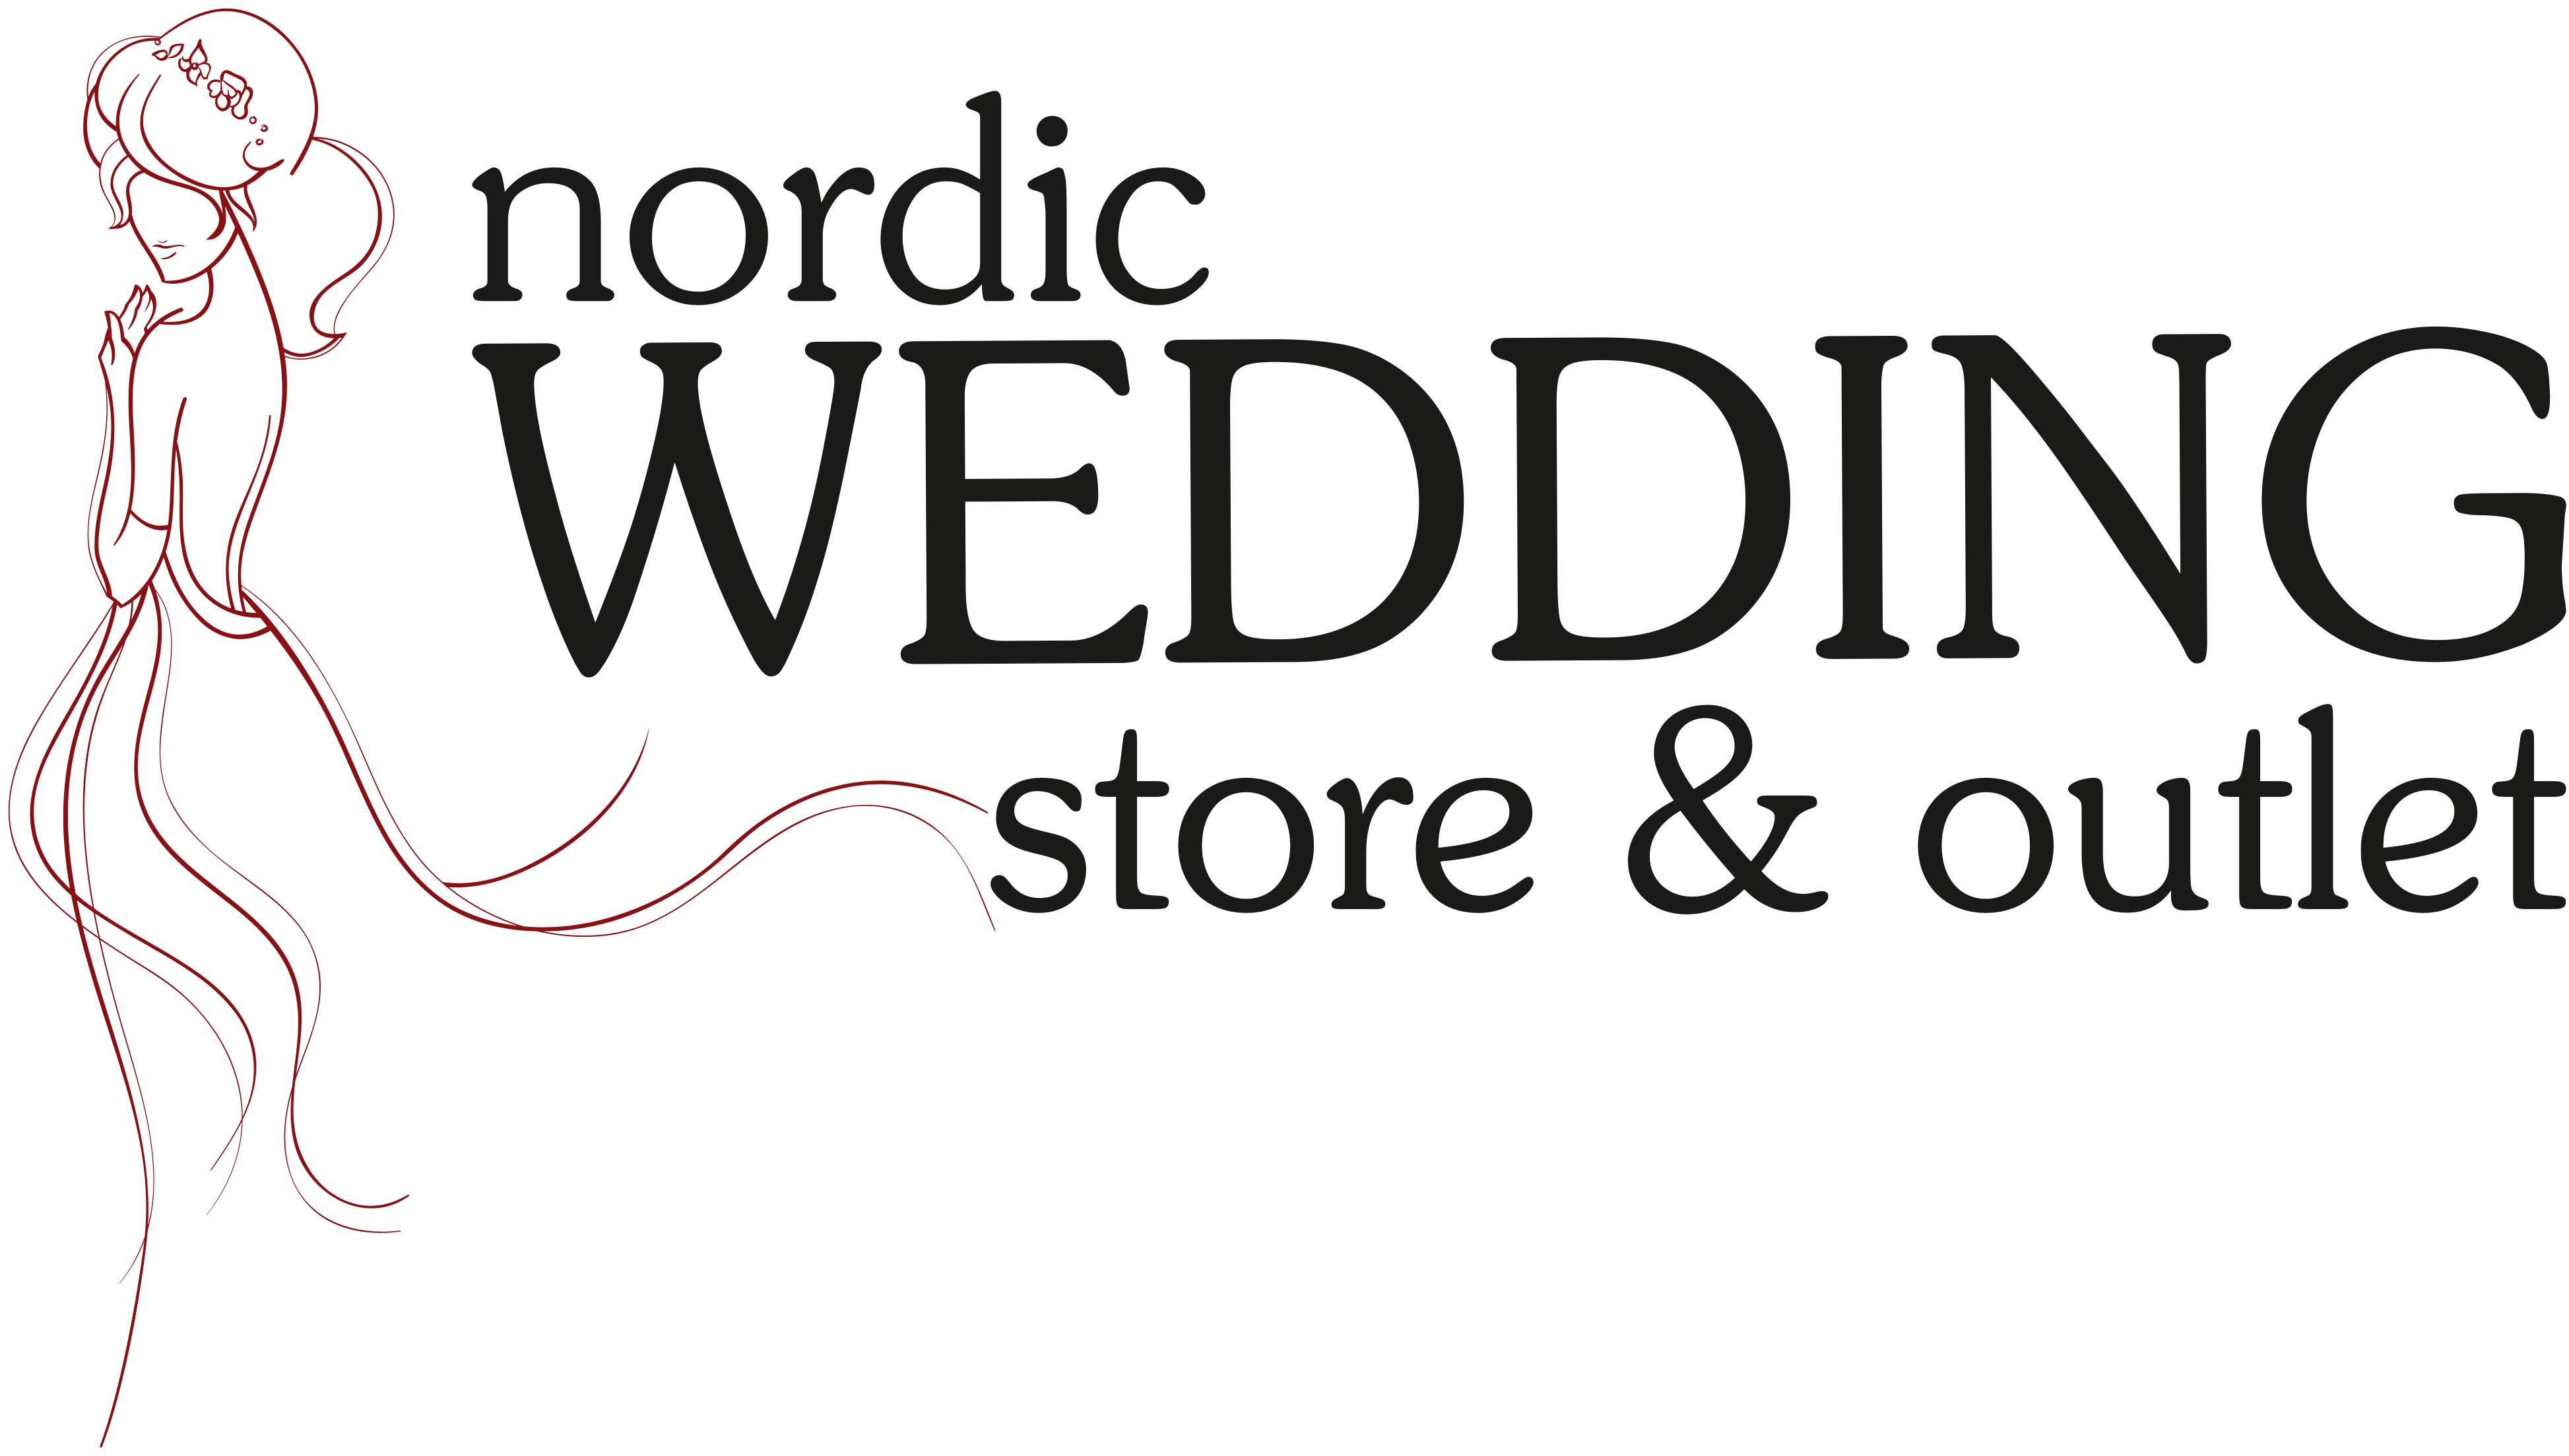 Nordic Wedding Store & Outlet